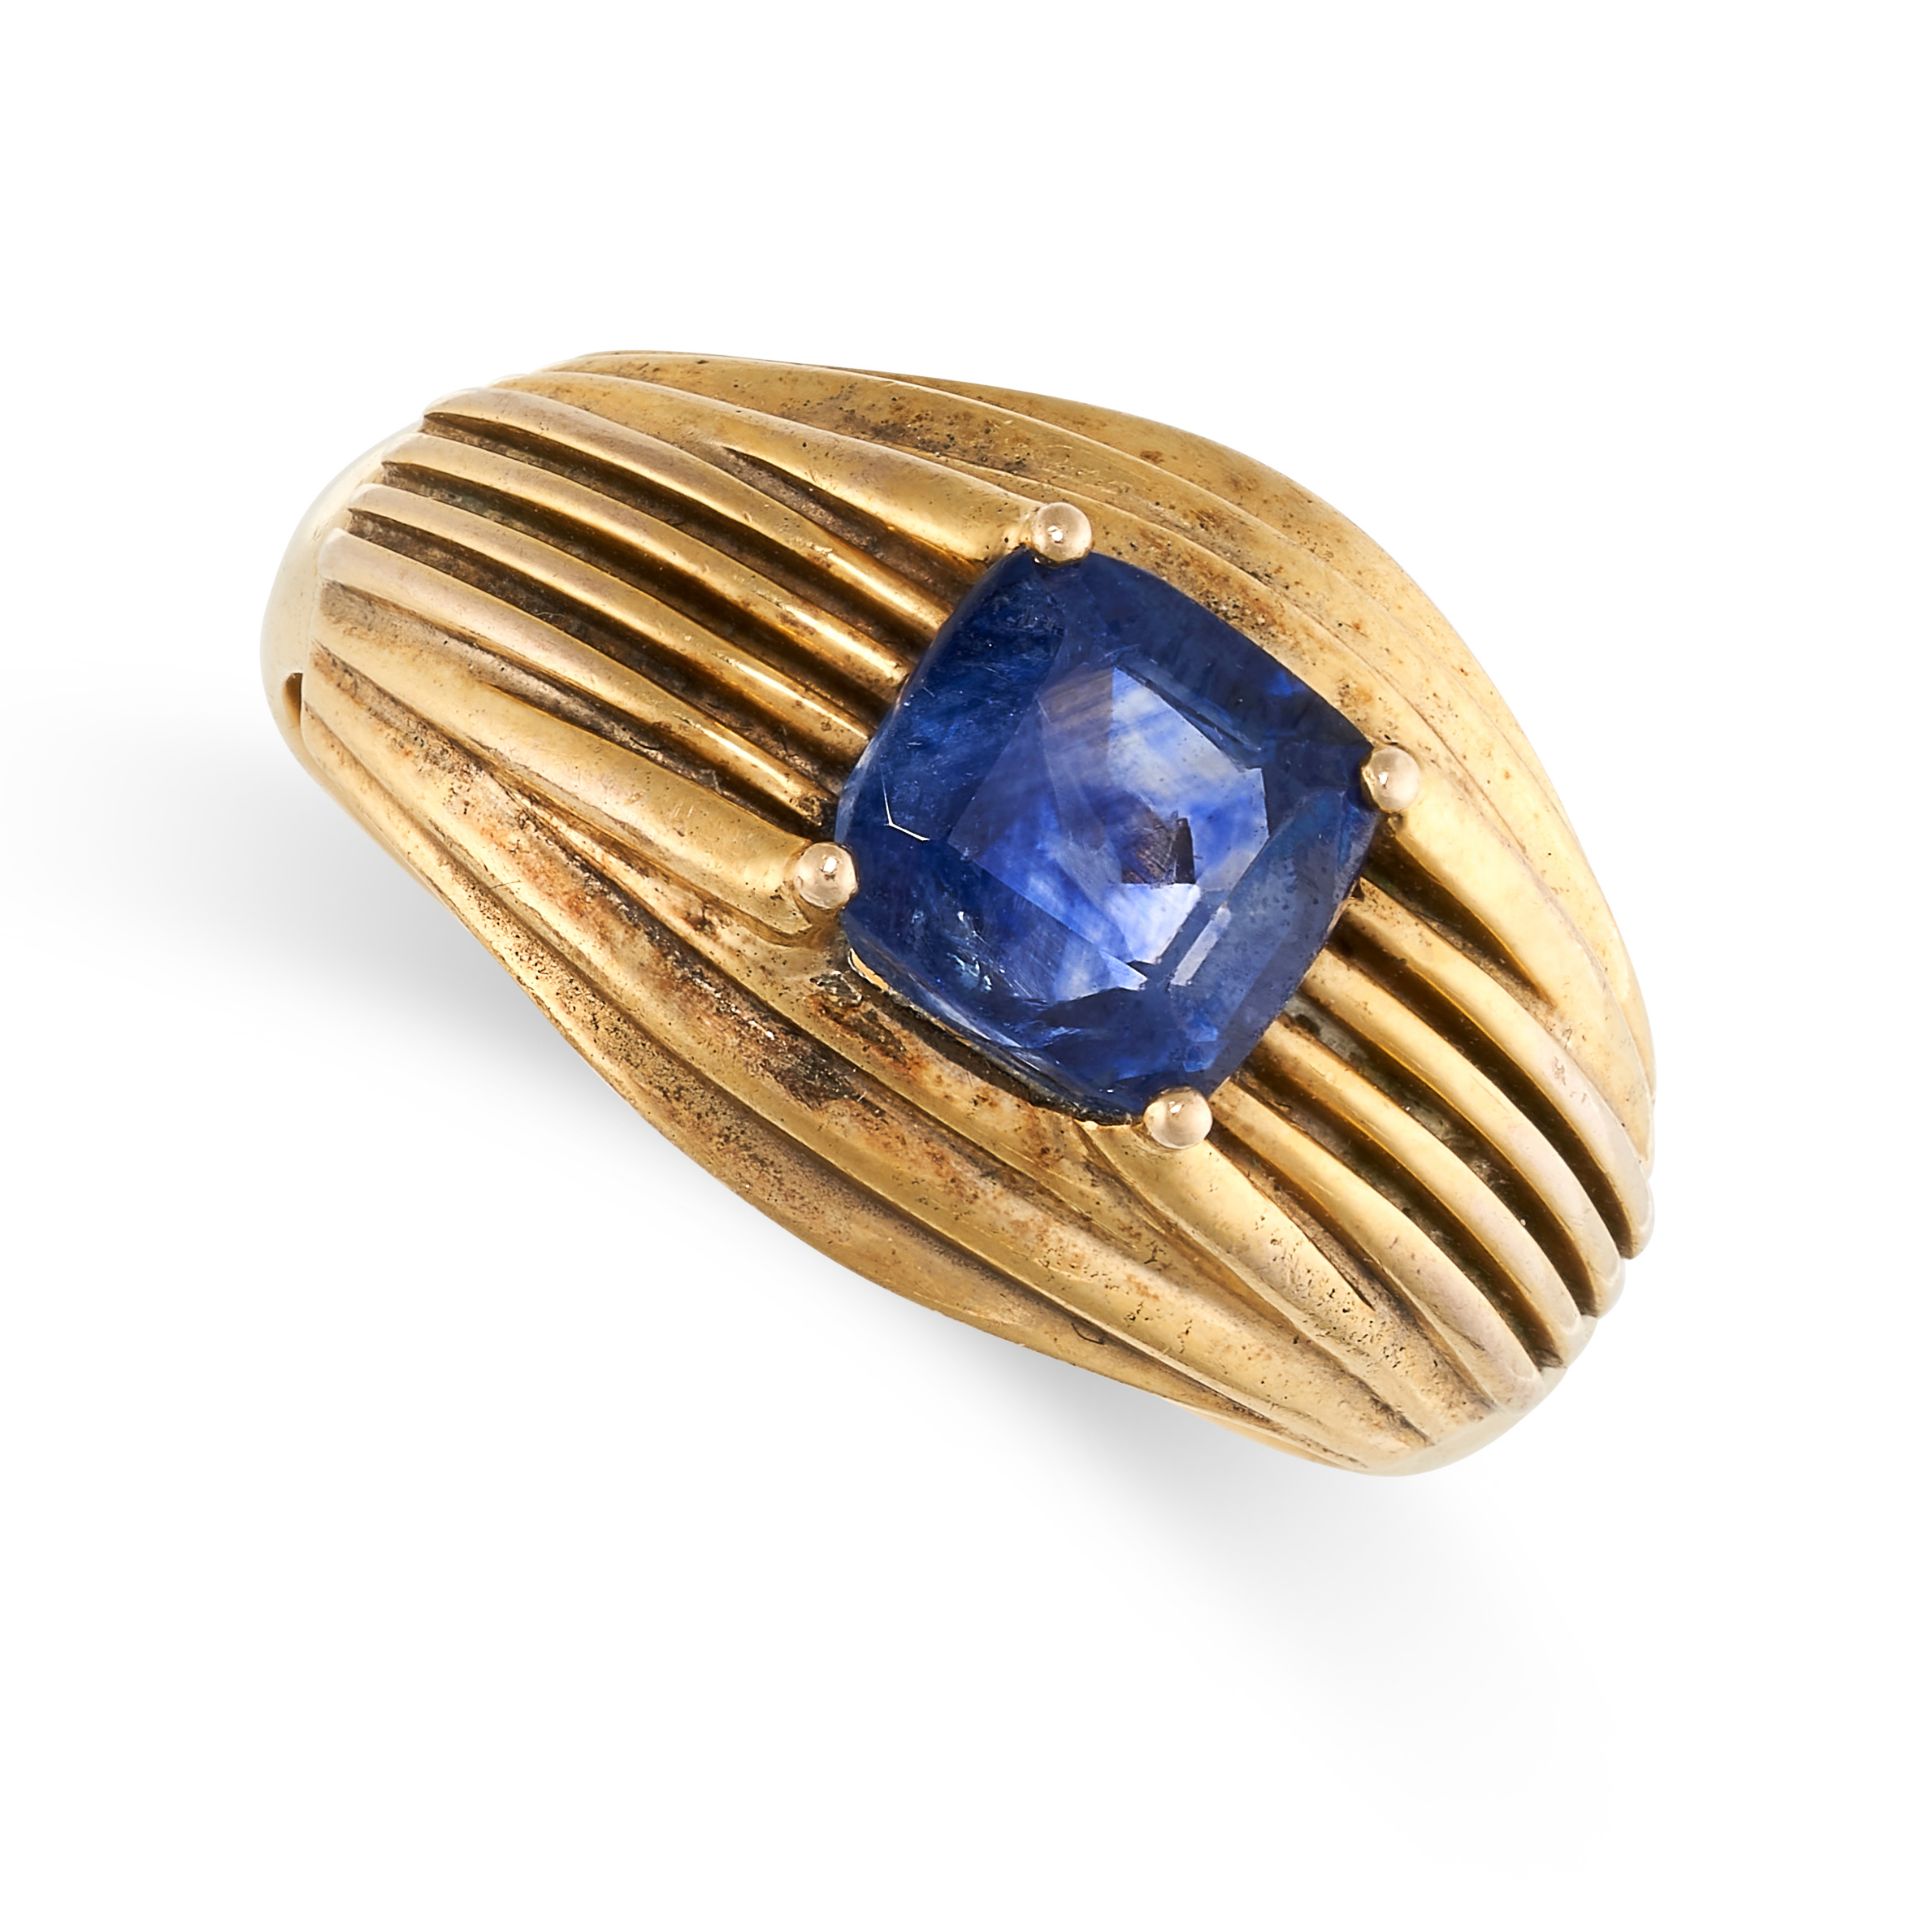 A SAPPHIRE DRESS RING in 18ct yellow gold, set with a cushion cut blue sapphire of 2.23 carats, with